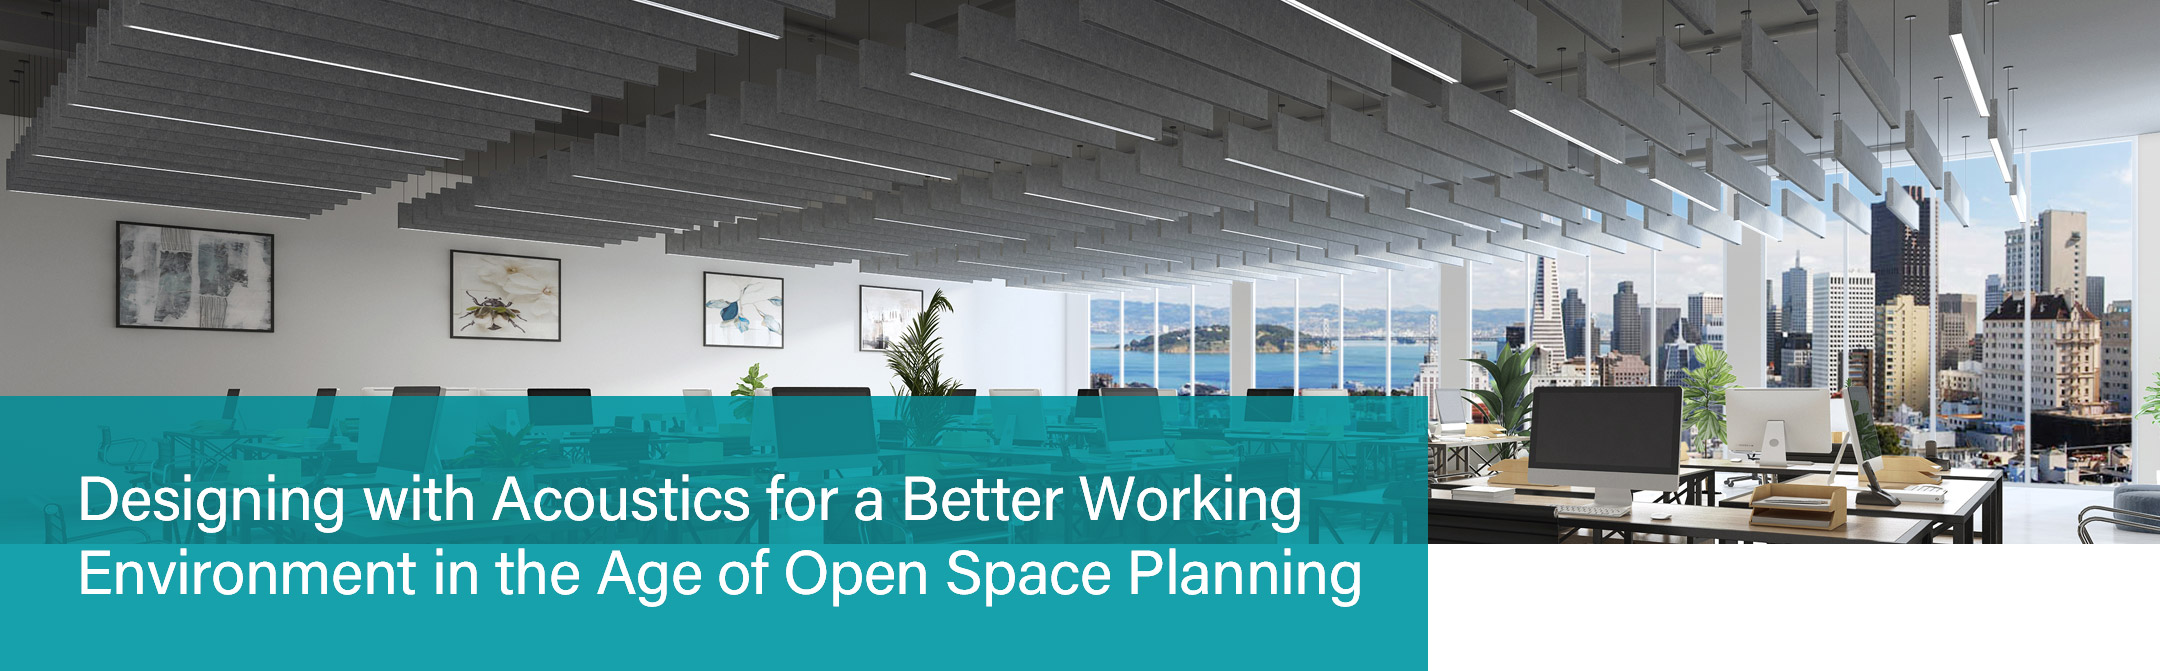 Designing with Acoustics for a Better Working Environment in the Age of Open Space Planning